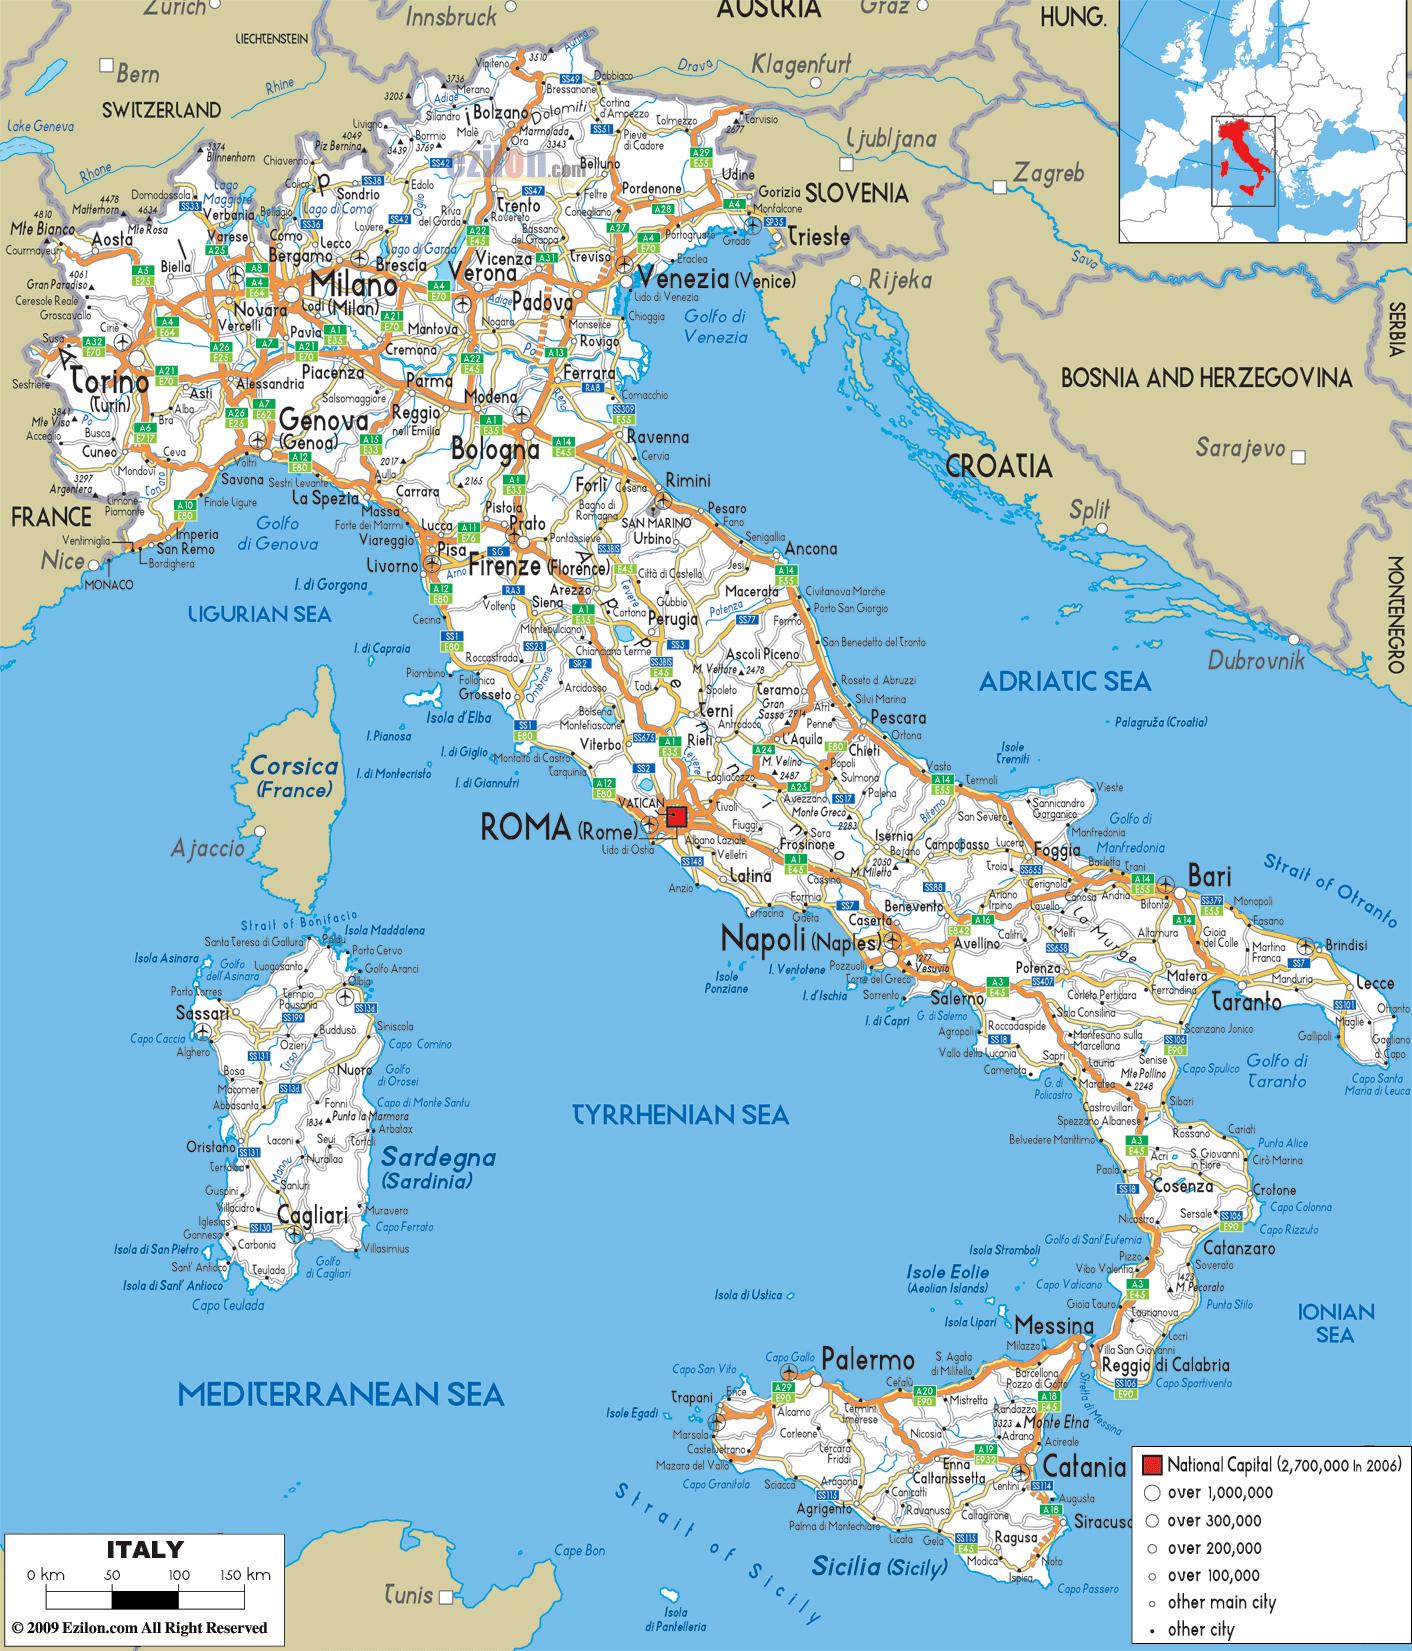 Italy road map - Road map of Italy detailed (Southern Europe - Europe)